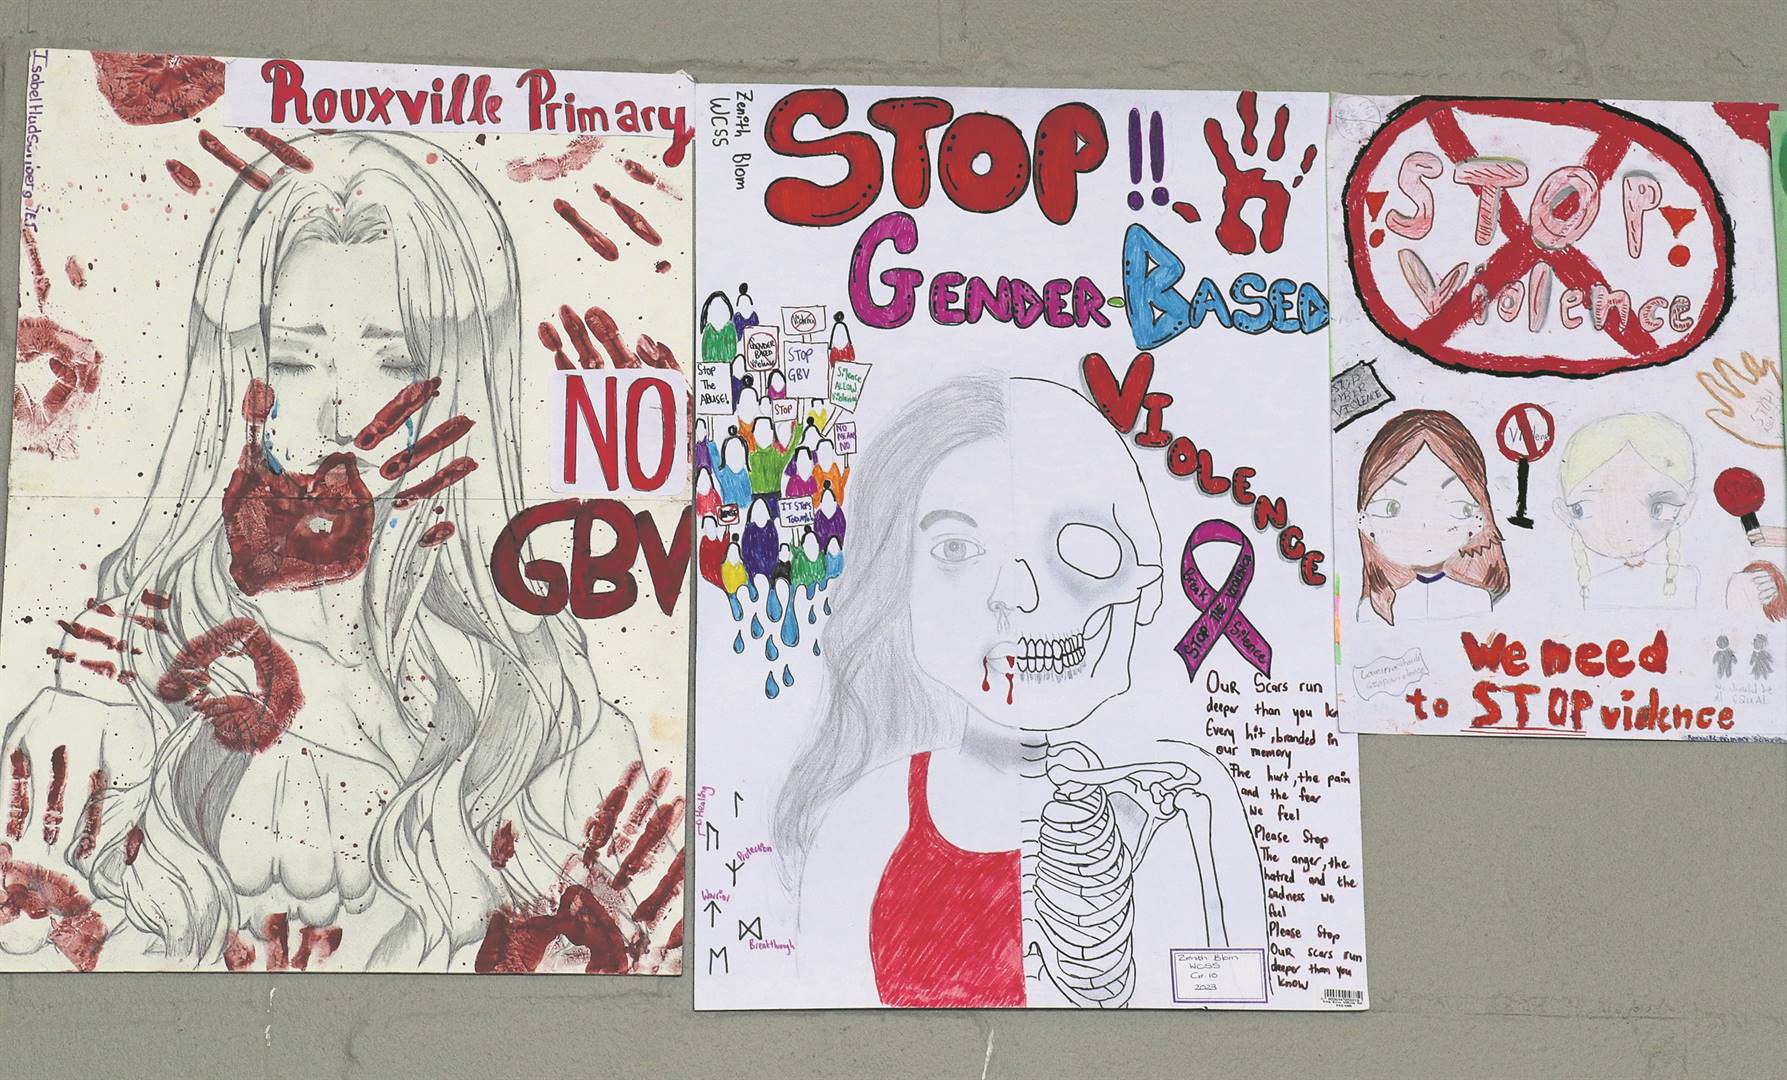 Artwork about gender-based and domestic violence created by learners of schools in the Kuils River area was displayed at the event. PHOTO: Carina Roux